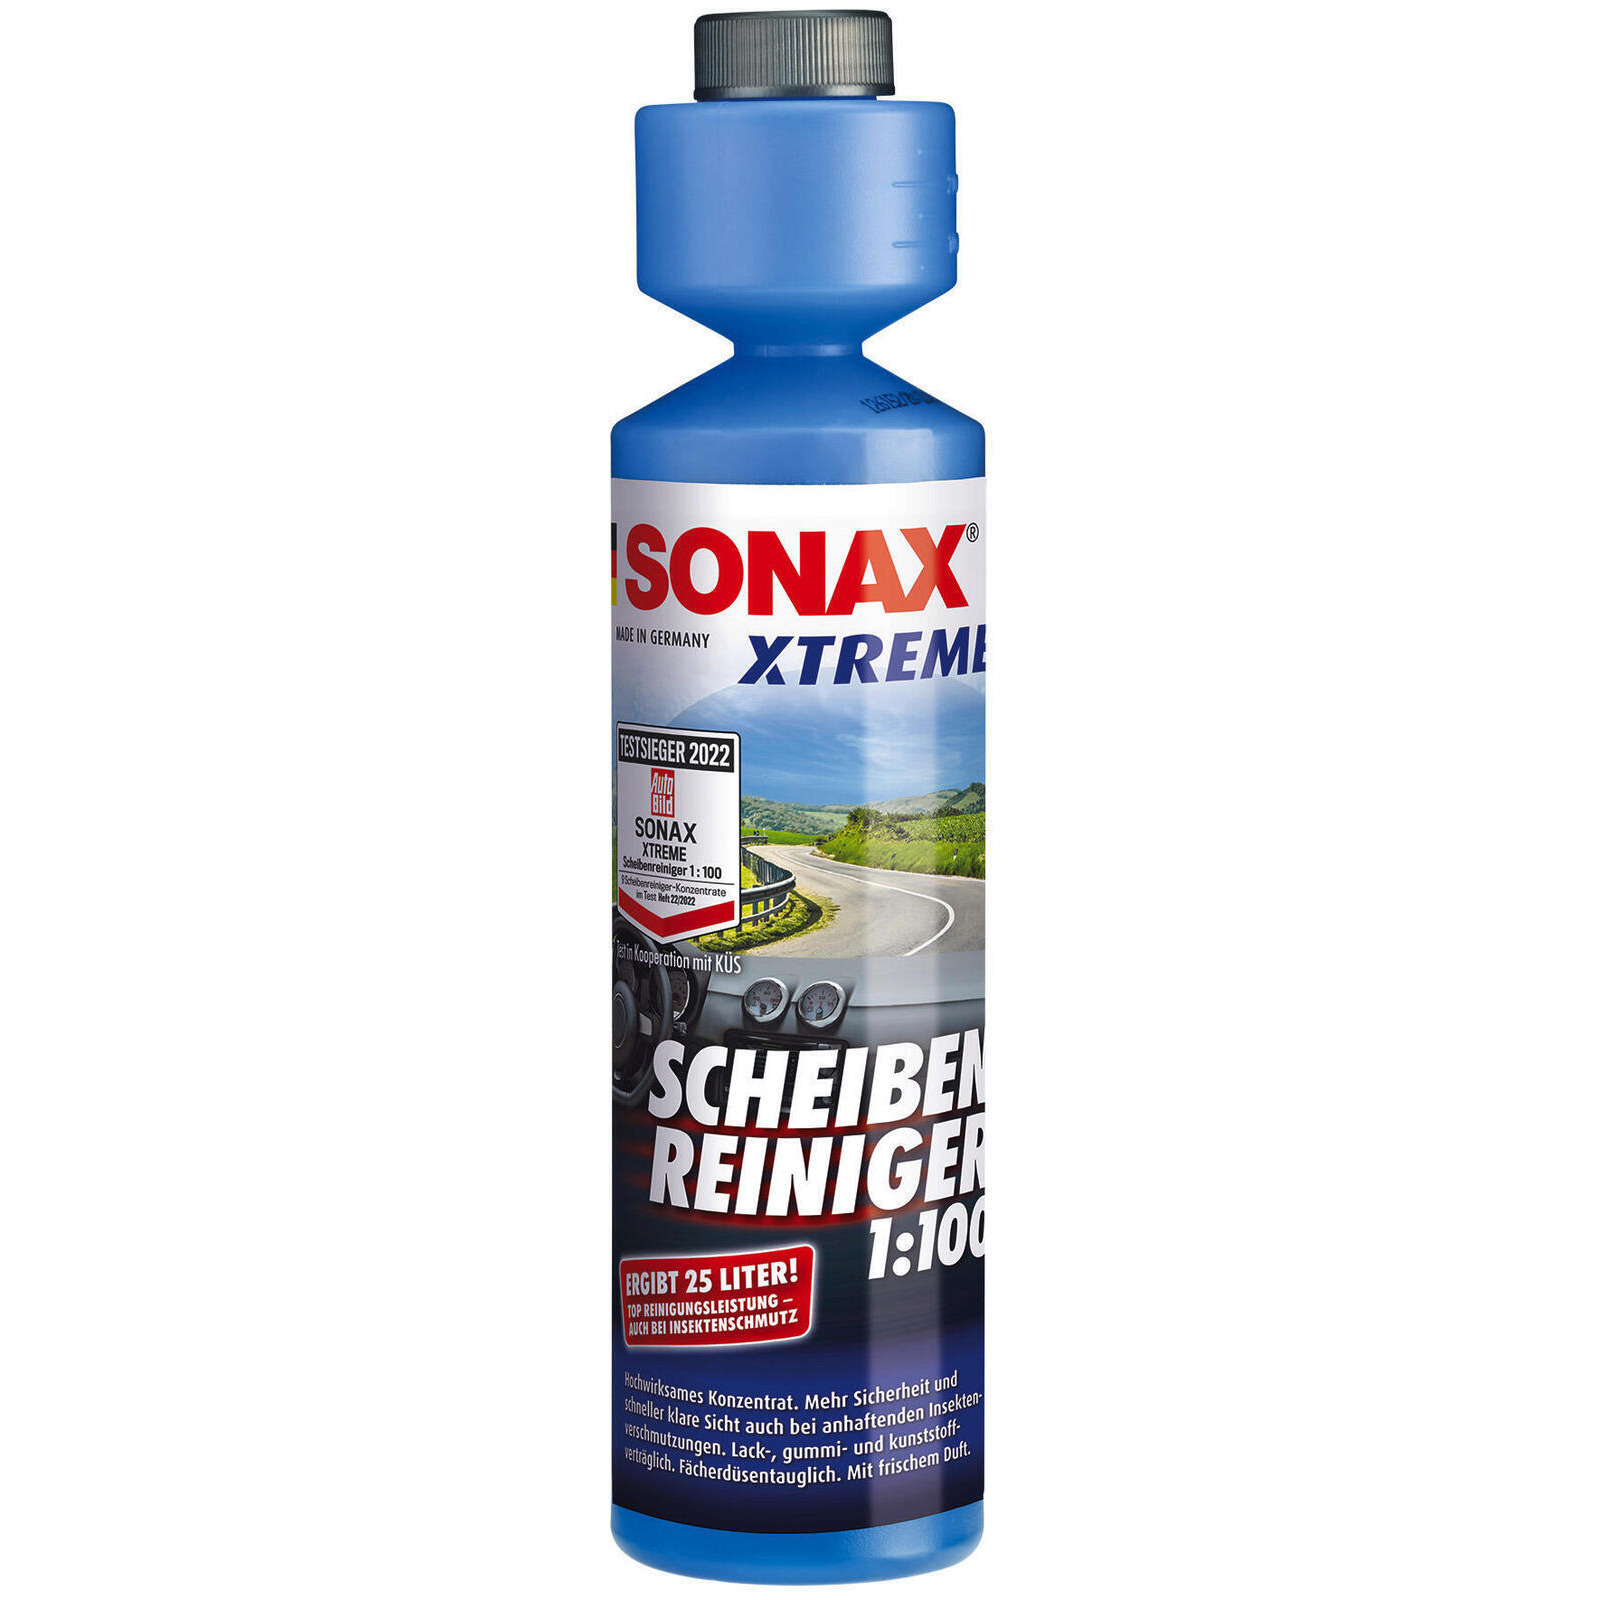 SONAX Cleaner, window cleaning system Xtreme Clear view 1:100 concentrate NanoPro